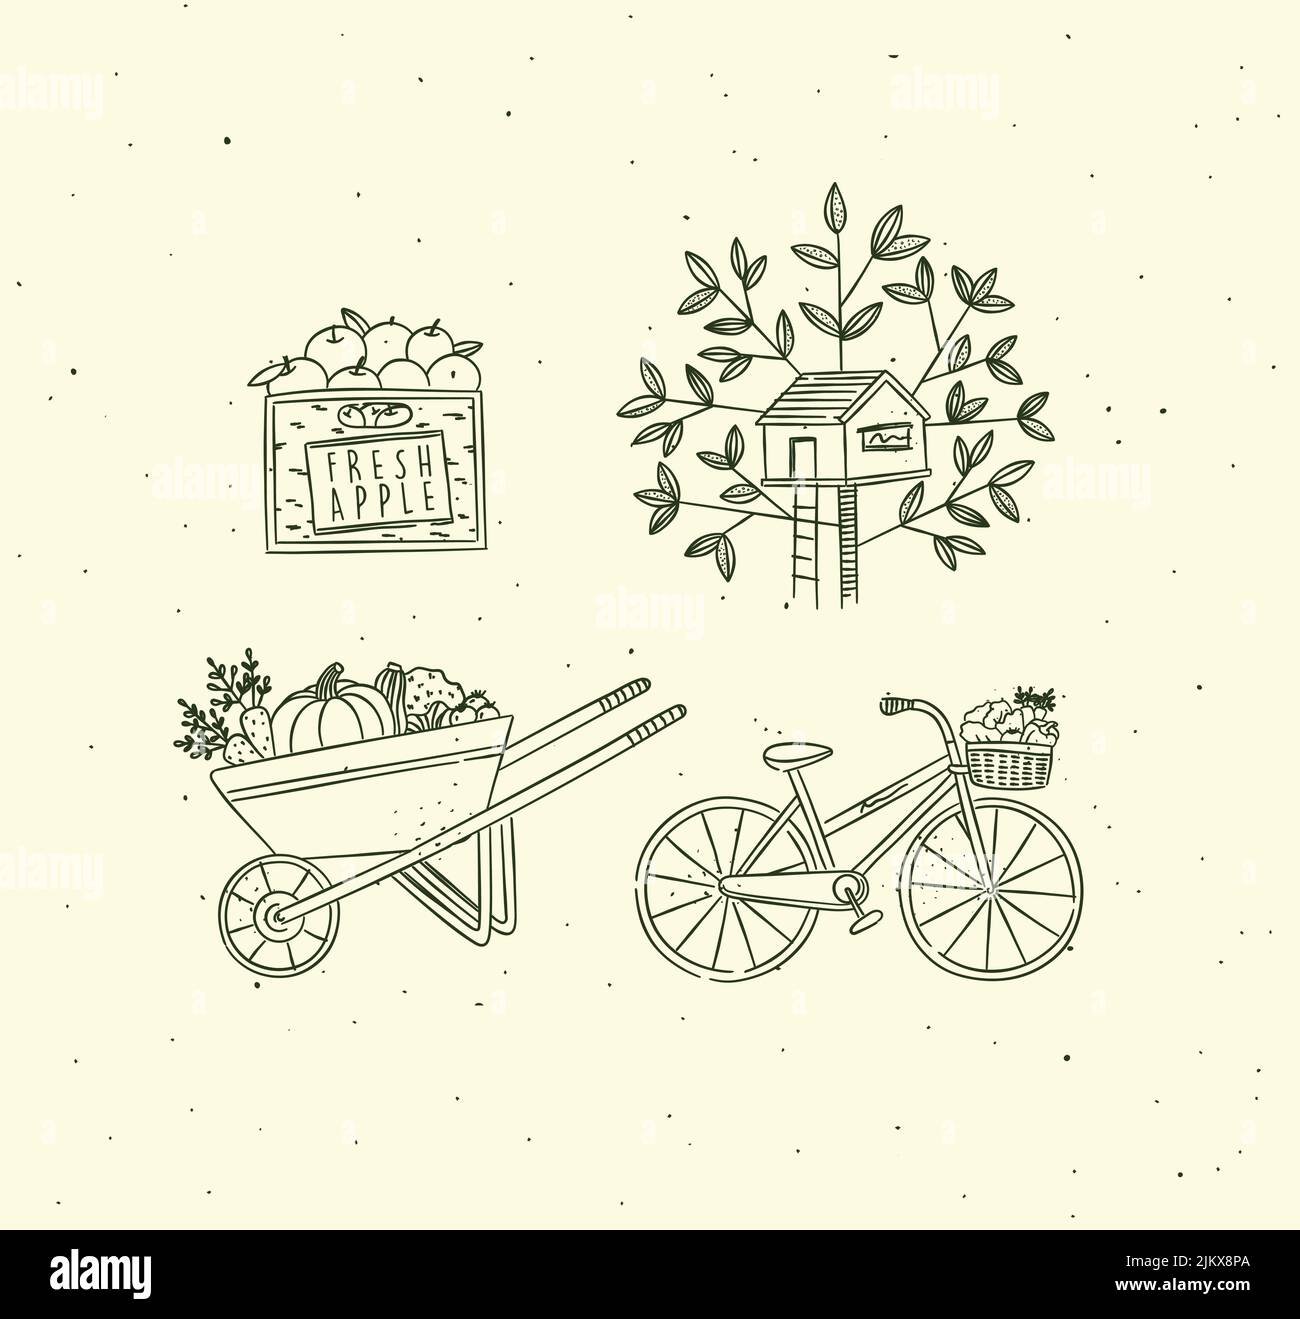 Village collection of icons apple crate, treehouse, vegetable cart, bicycle drawing in graphic style on beige background Stock Vector